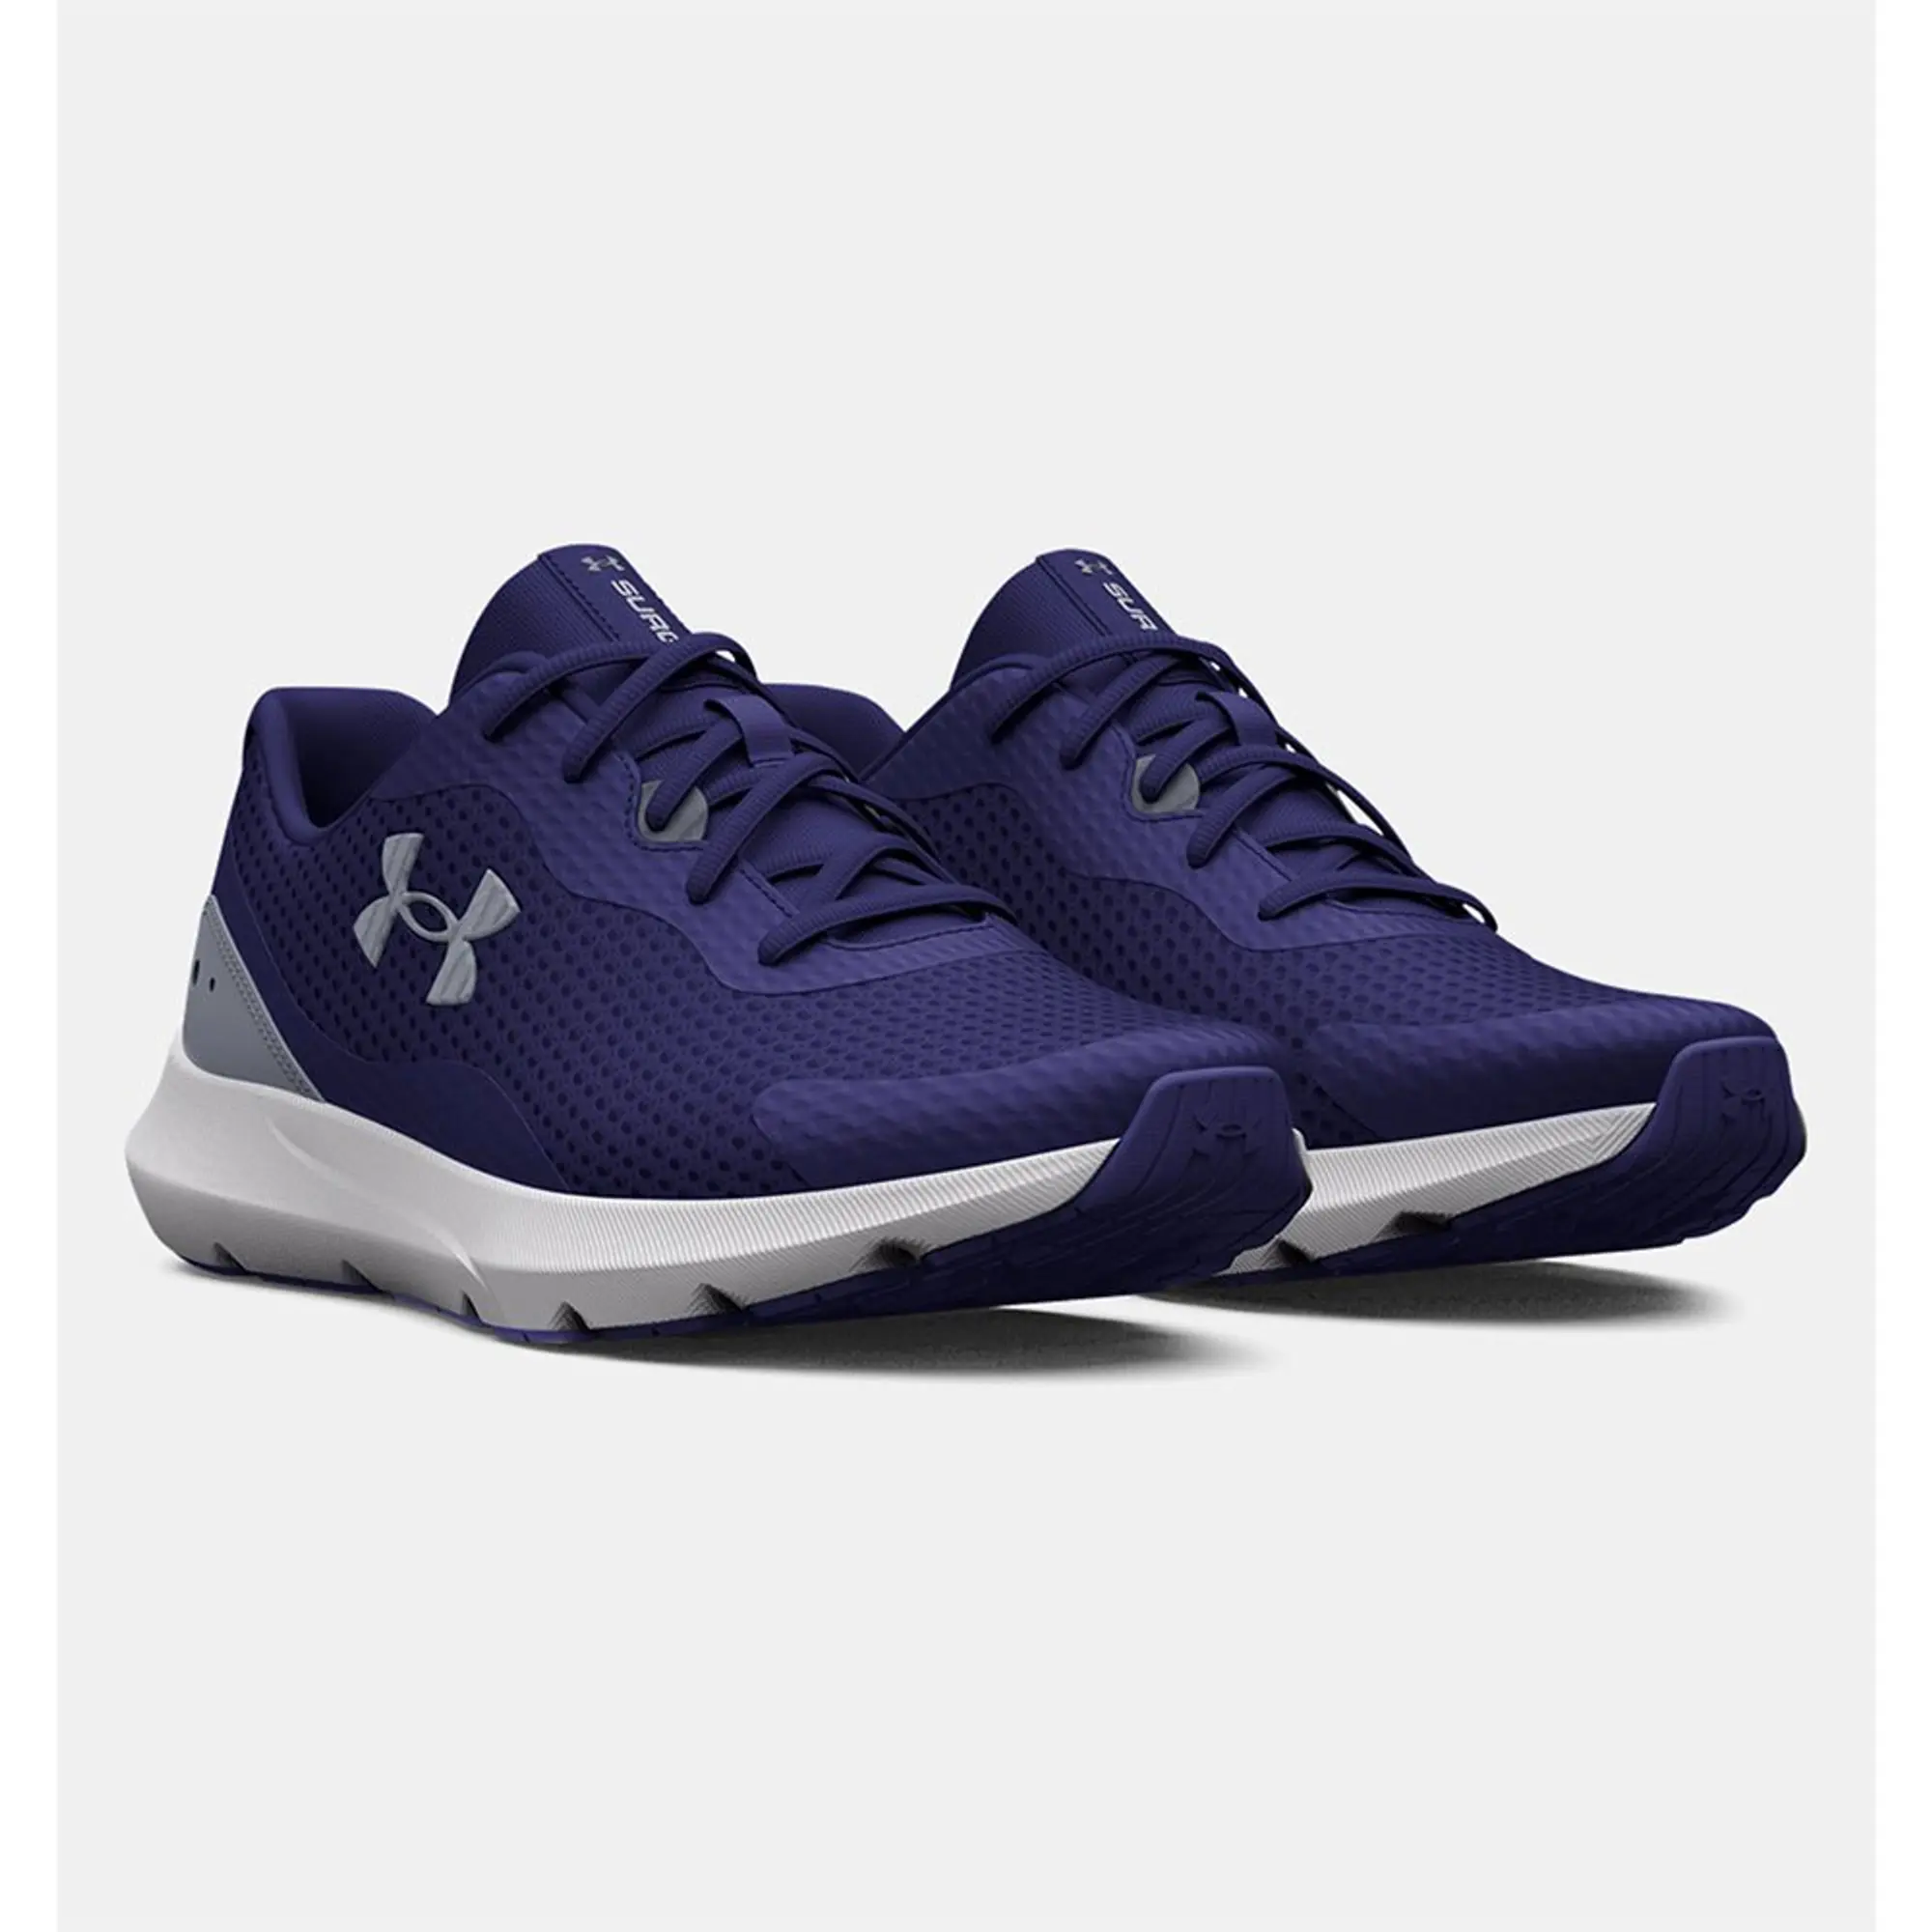 Under Armour Surge 3 Mens Running Shoes - Blue